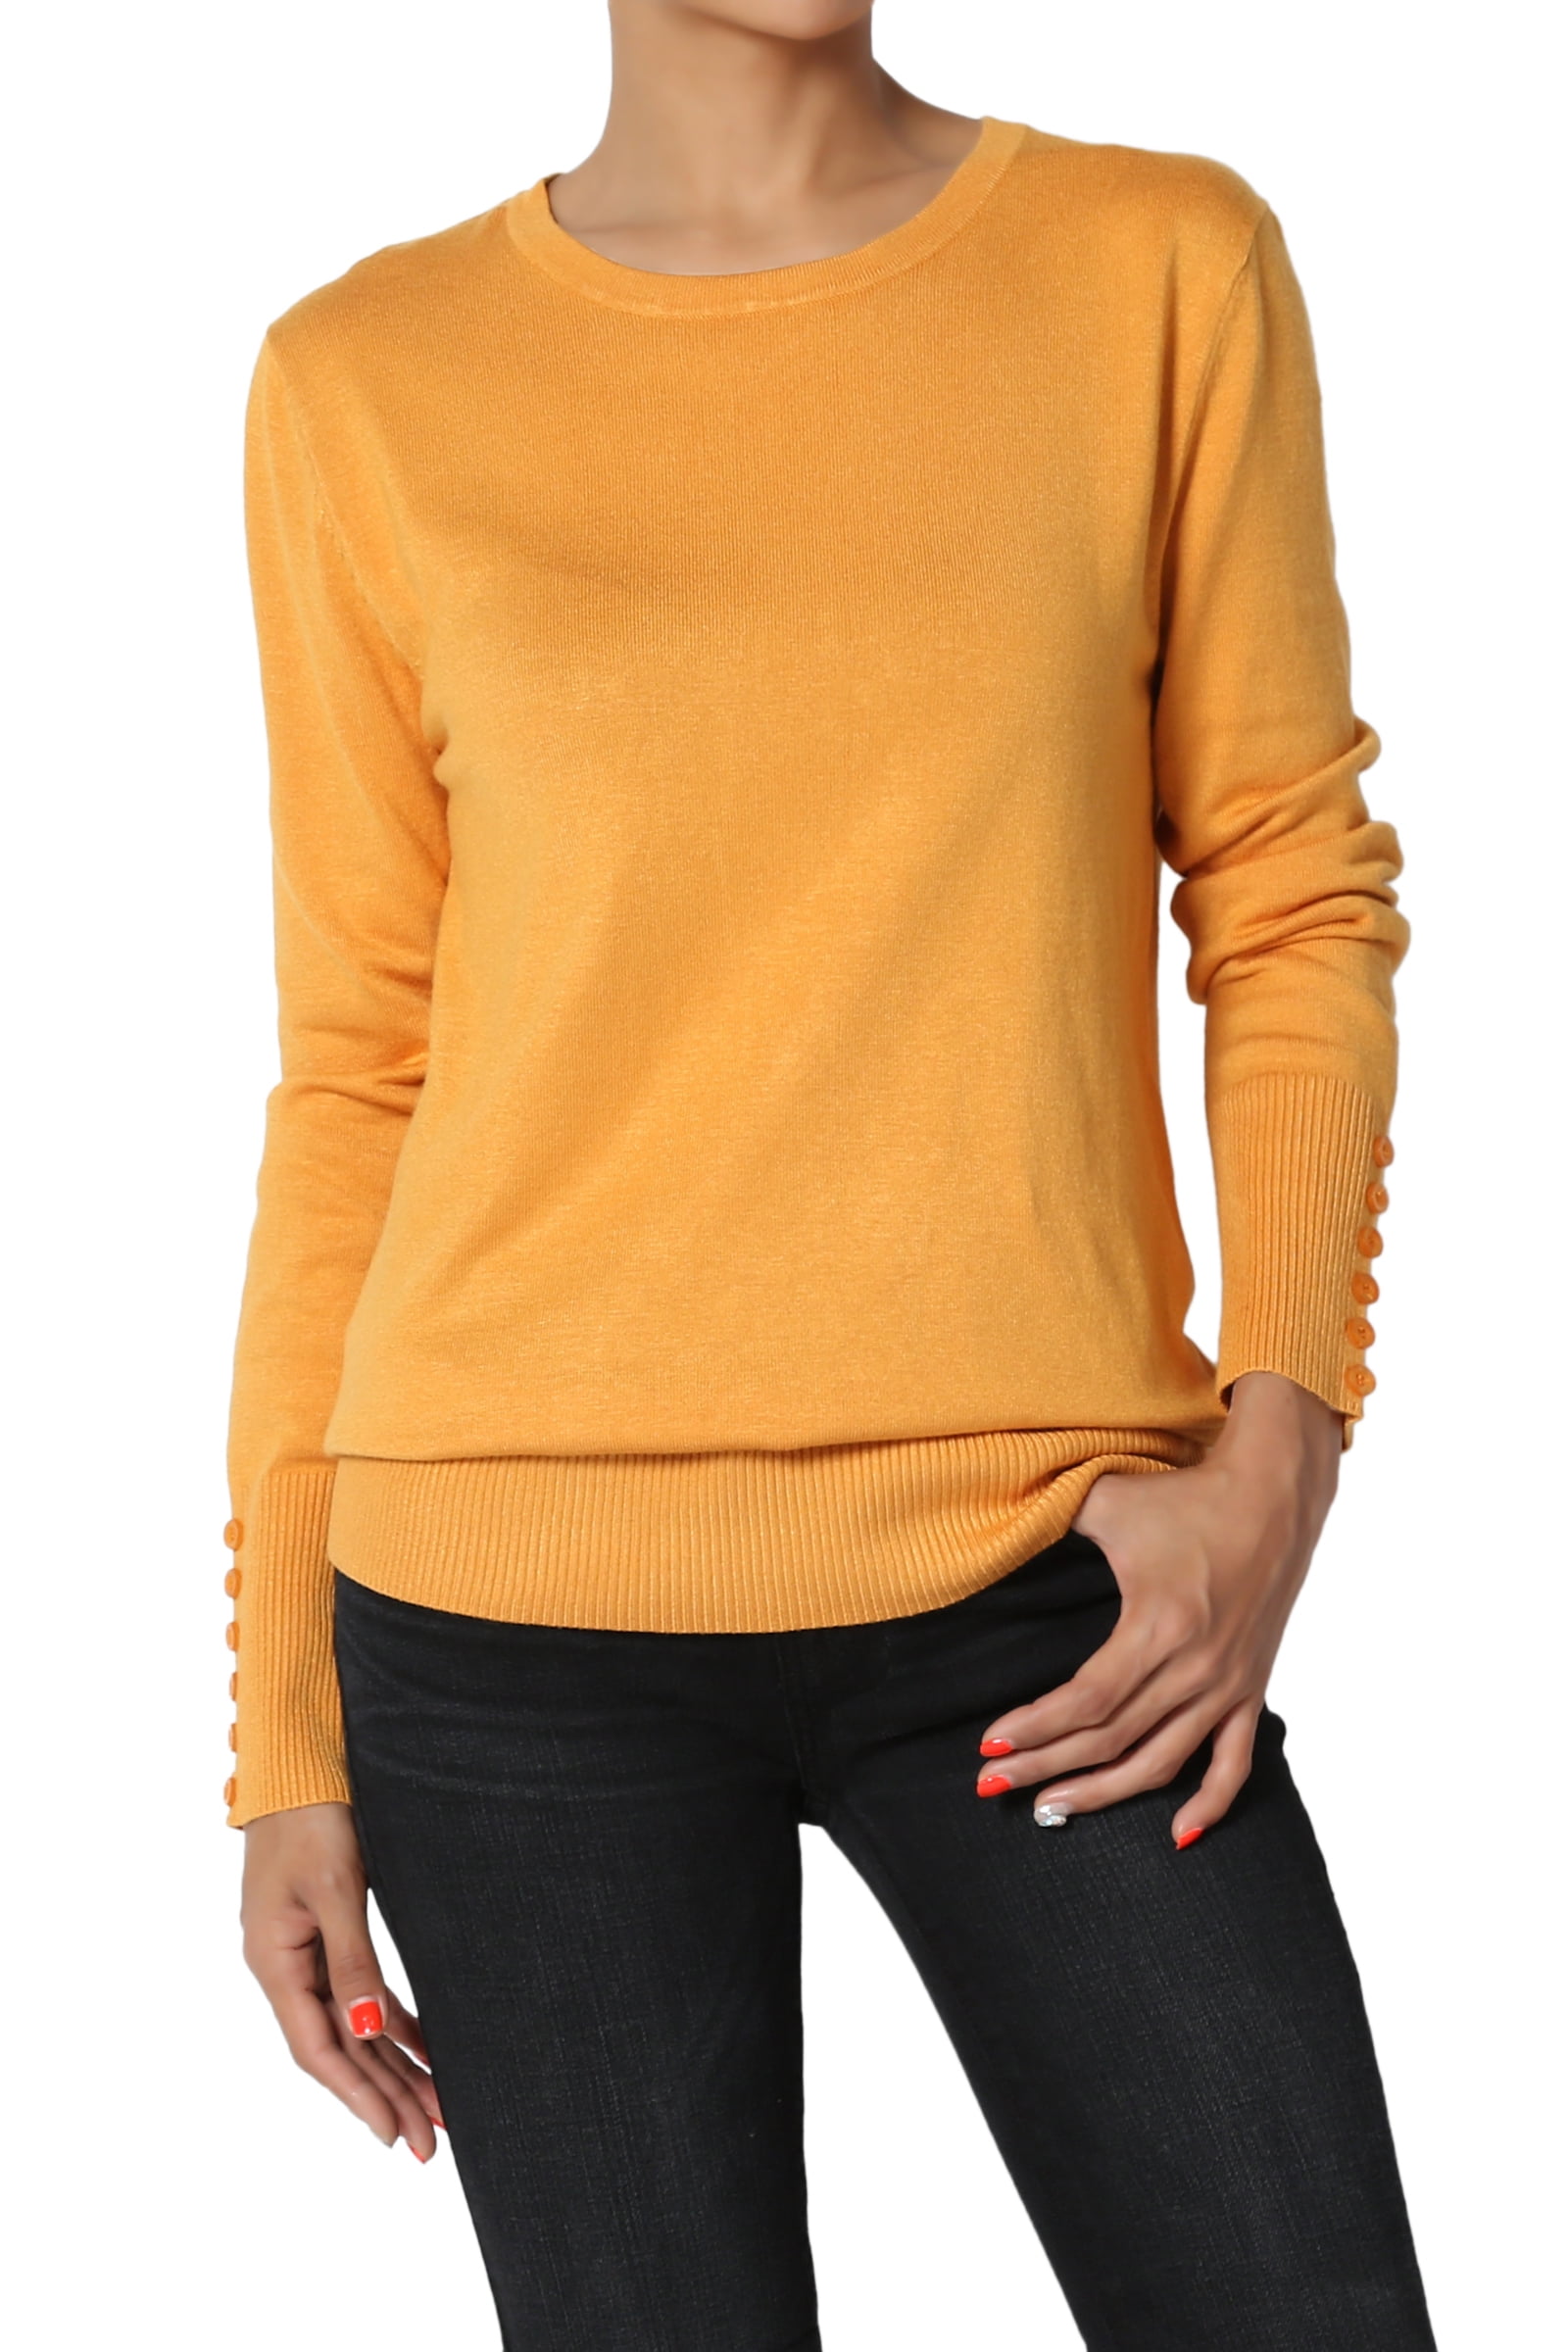 TheMogan Women's Crew Neck Button Long Sleeve Loose Fit Pullover Knit